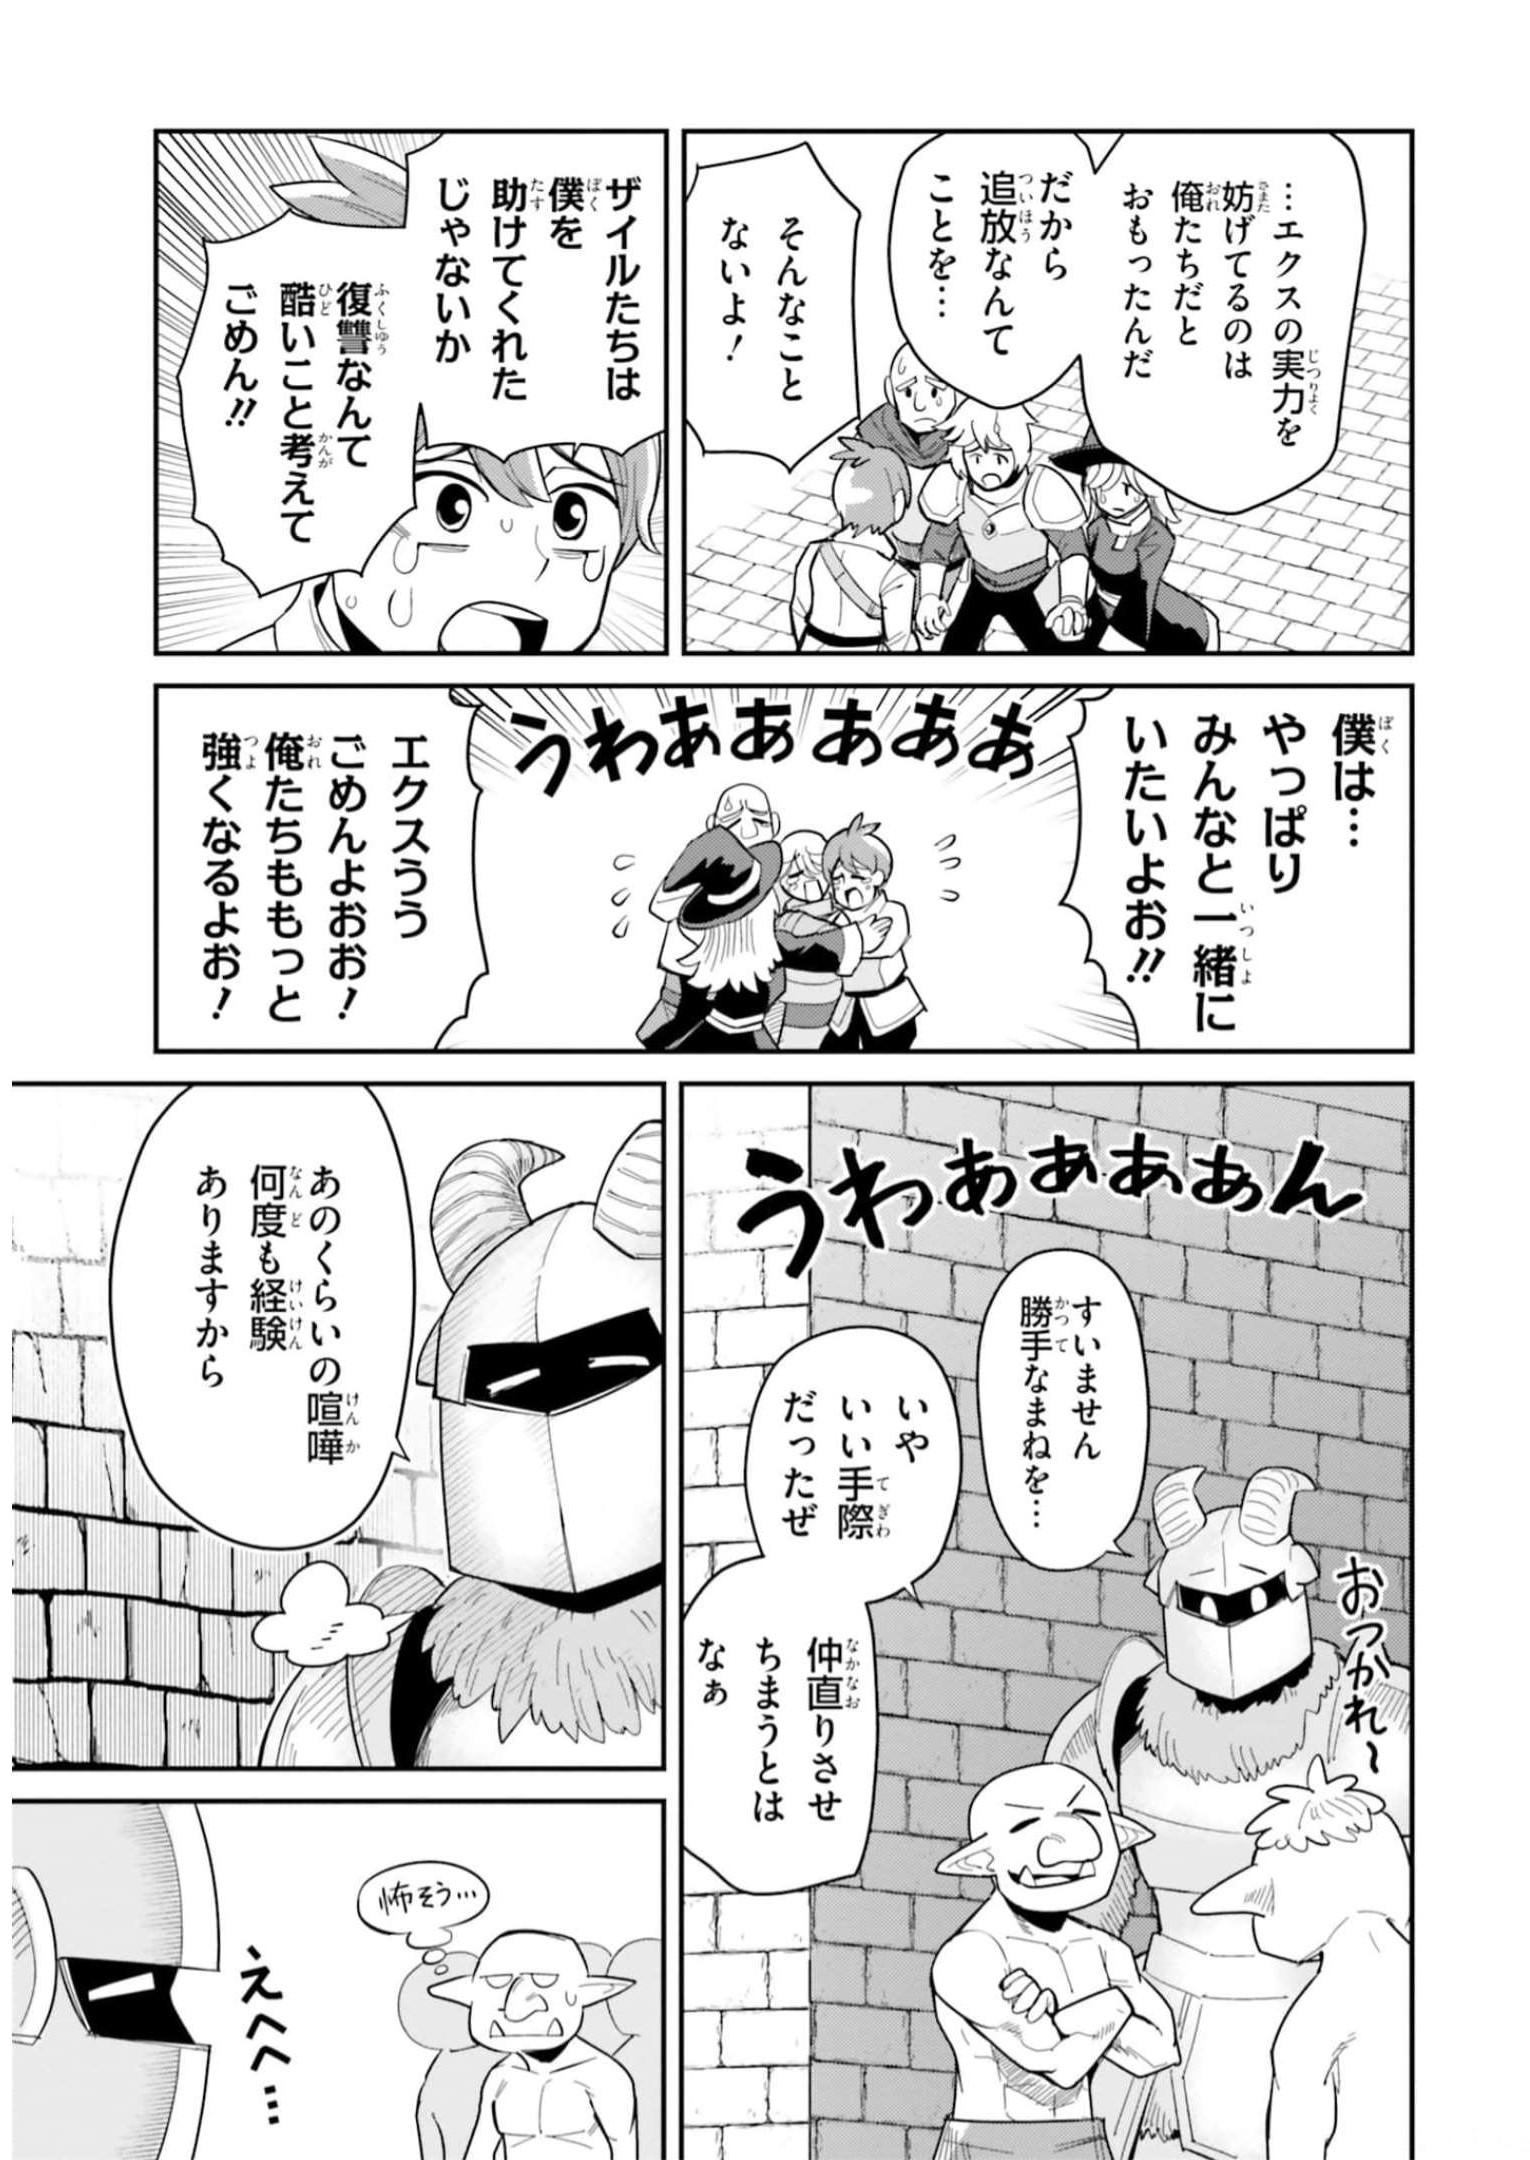 Dungeon Friends Forever Dungeon’s Childhood Friend ダンジョンの幼なじみ 第25話 - Page 17